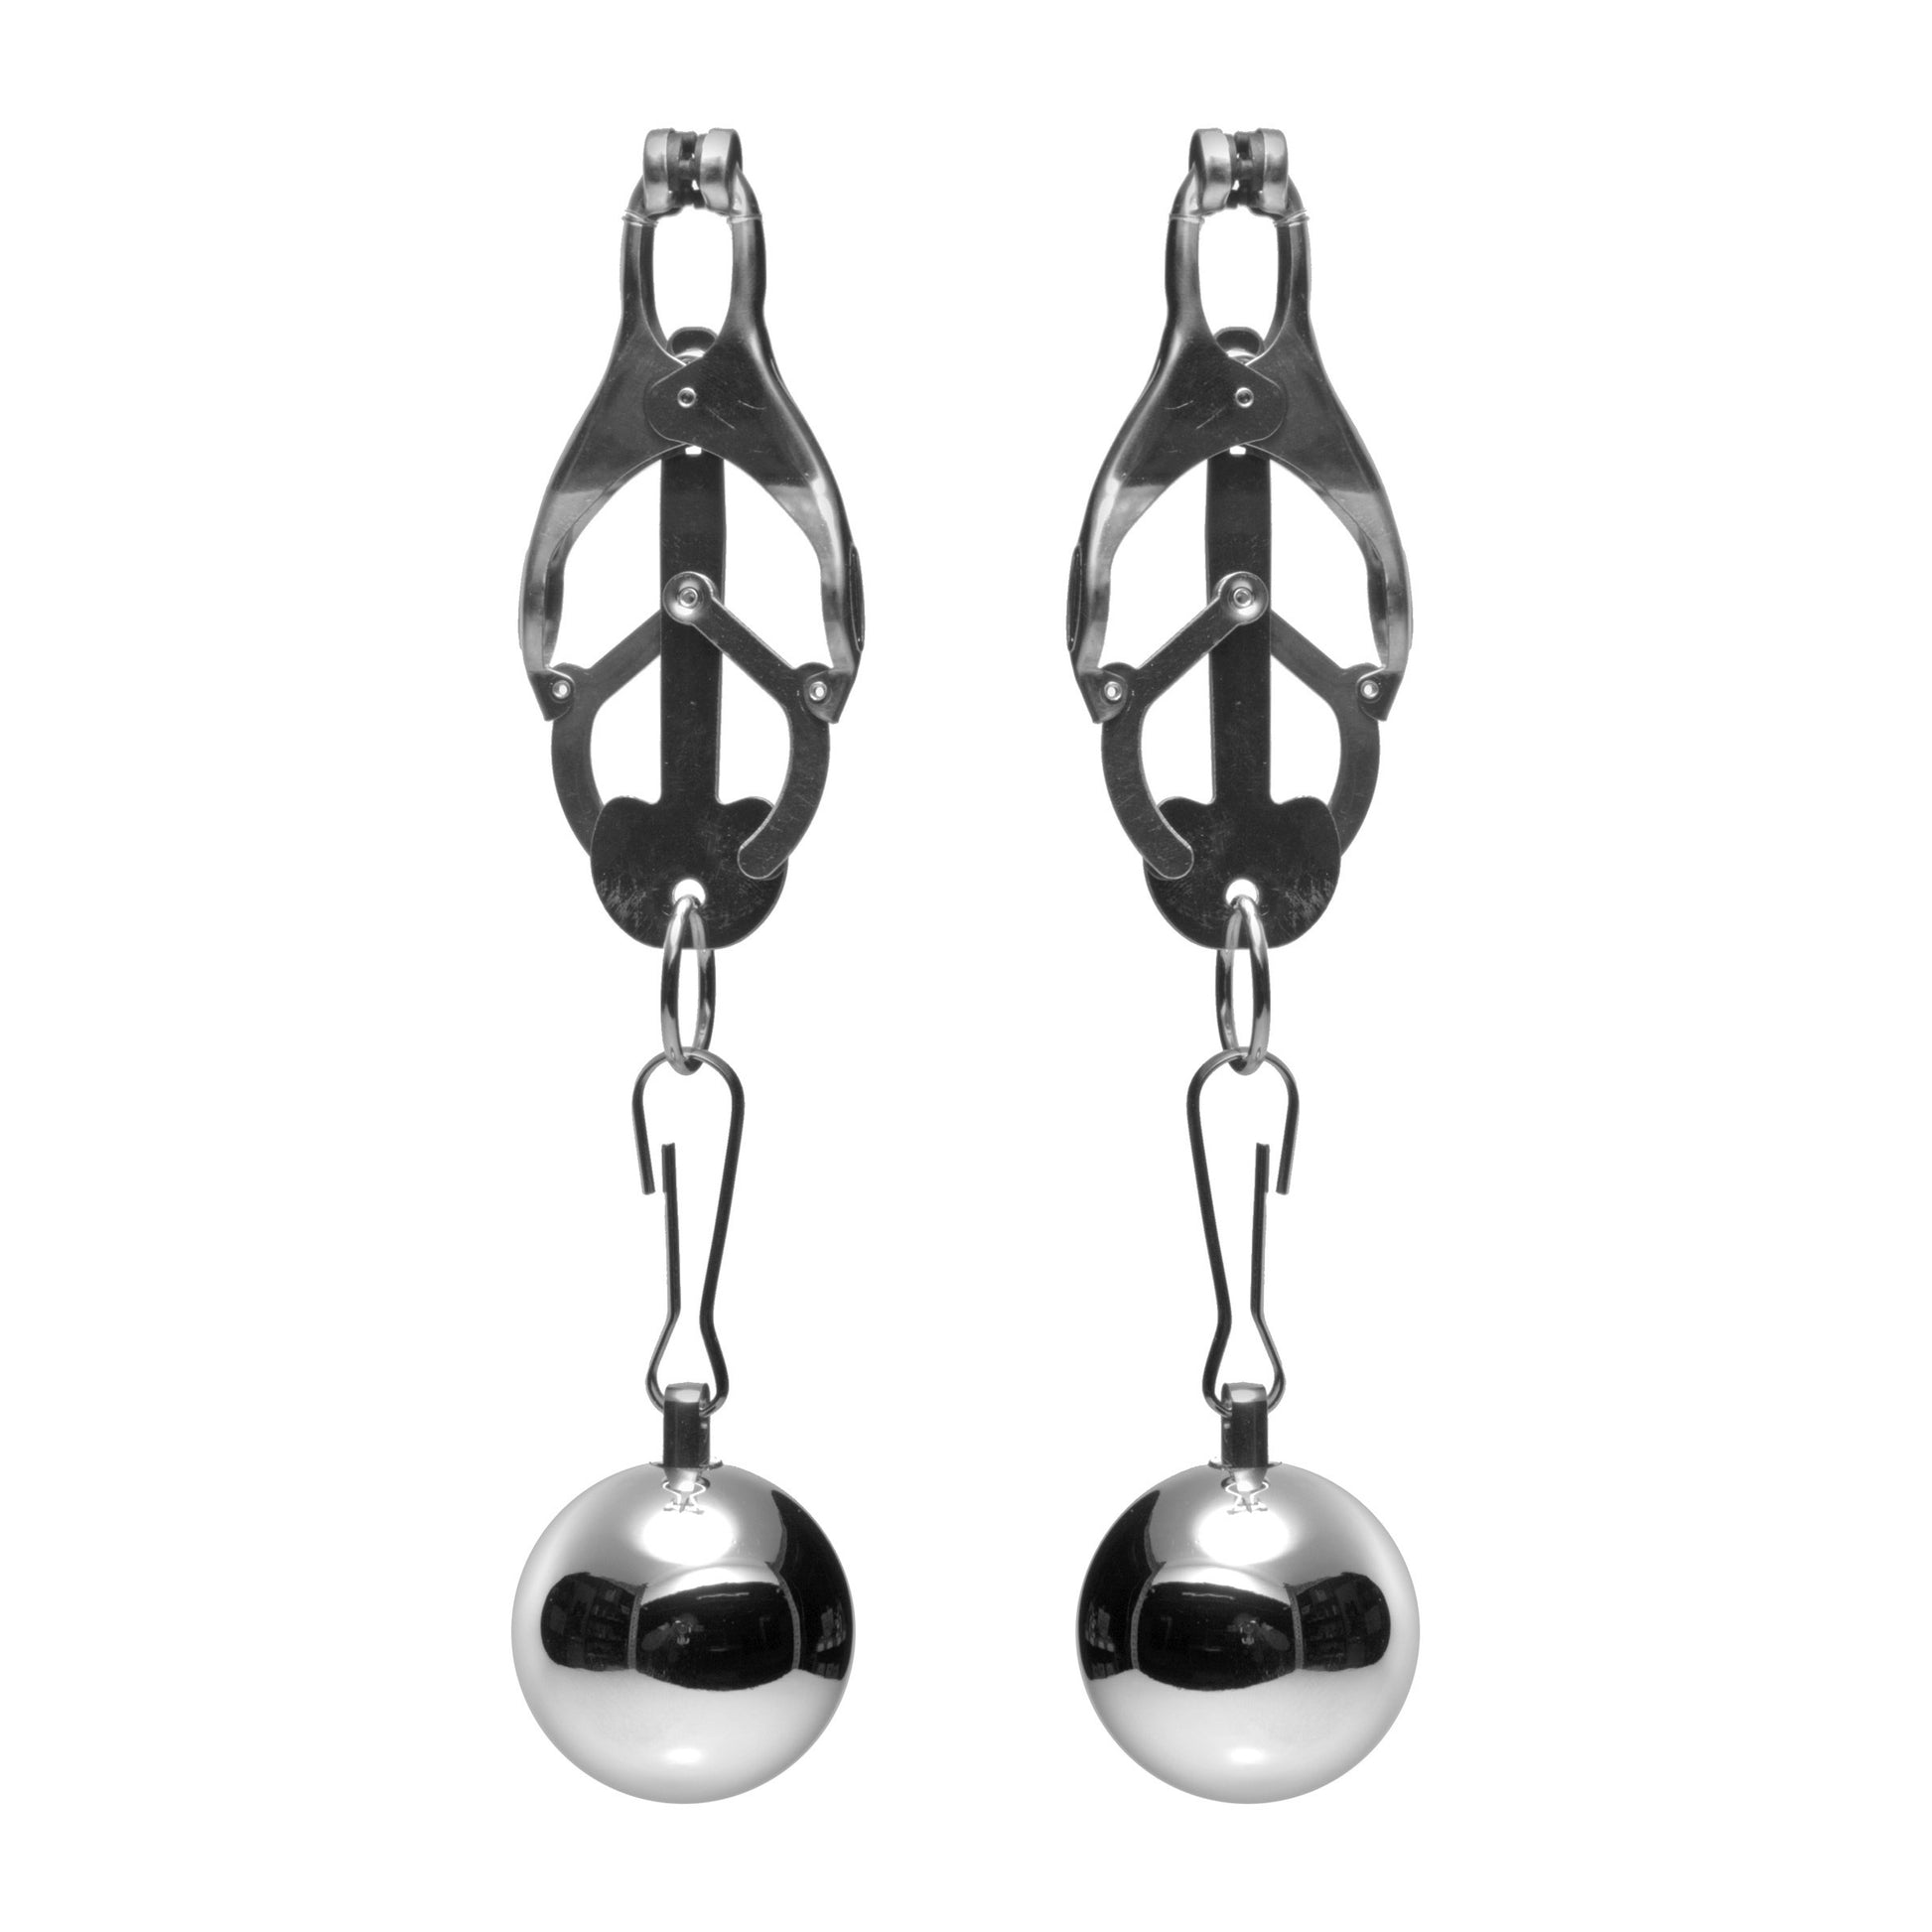 Deviant Monarch Weighted Nipple Clamps - UABDSM